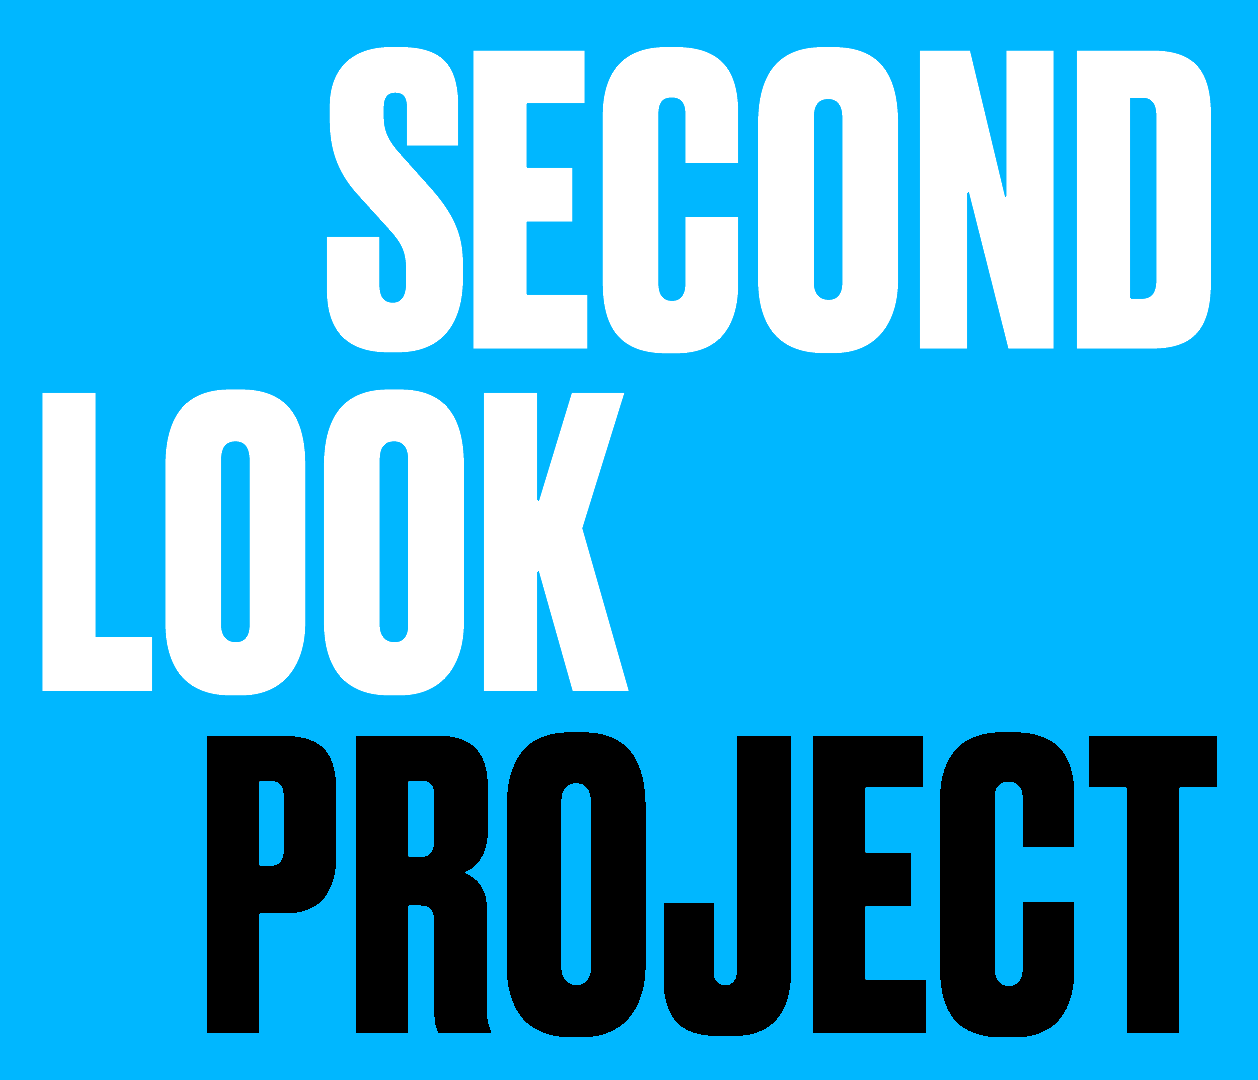 The Second Look Project